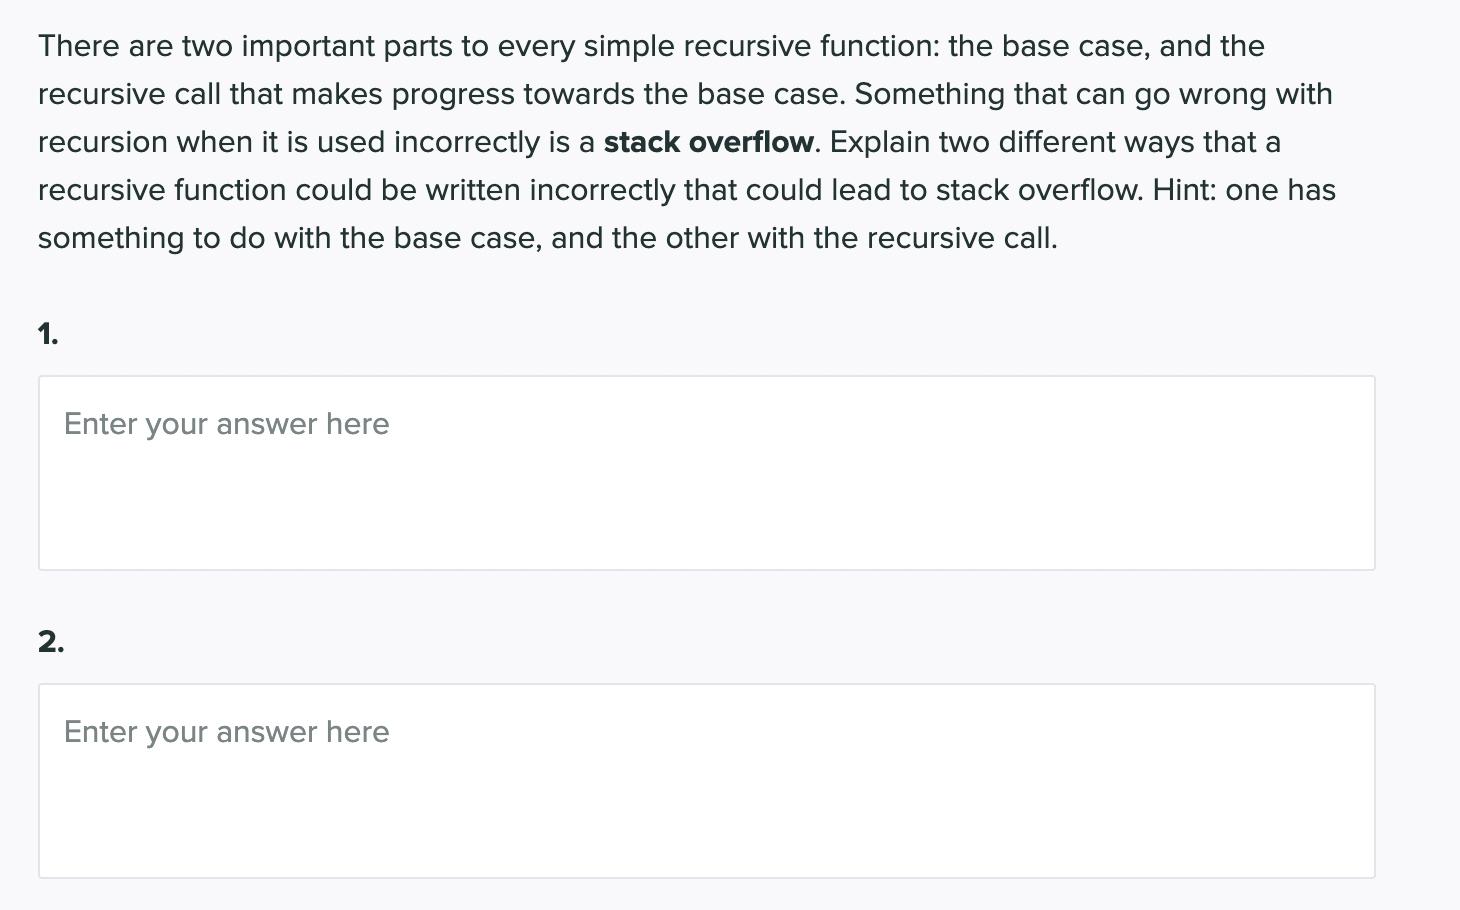 There are two important parts to every simple recursive function: the base case, and the recursive call that